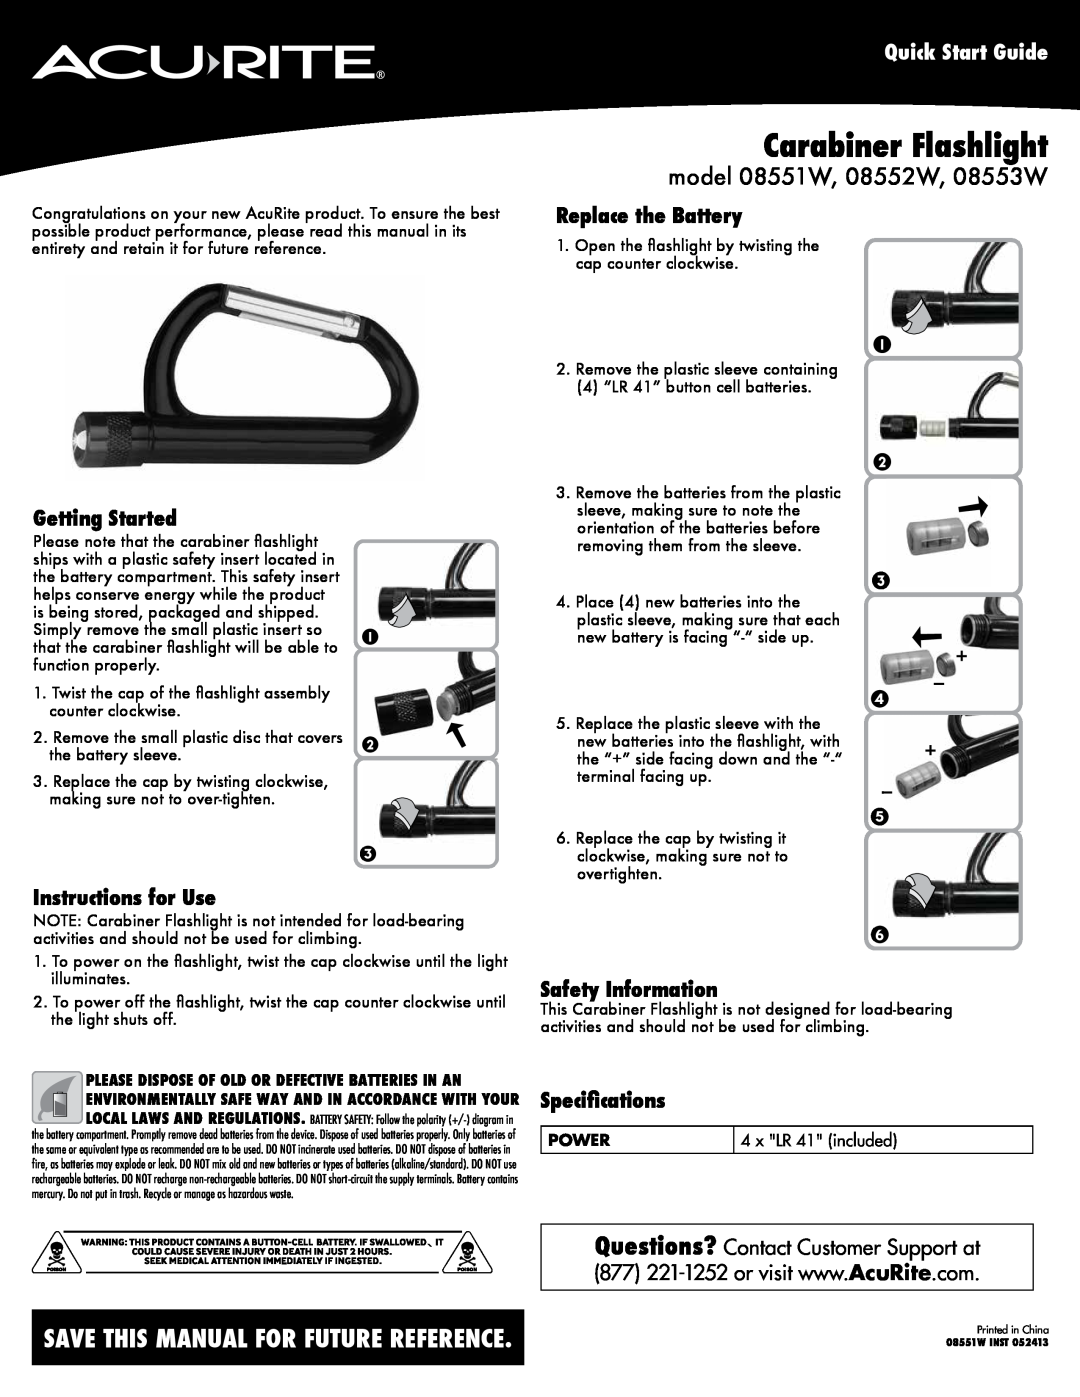 Acu-Rite quick start Carabiner Flashlight, Save This Manual For Future Reference, model 08551W, 08552W, 08553W, Power 